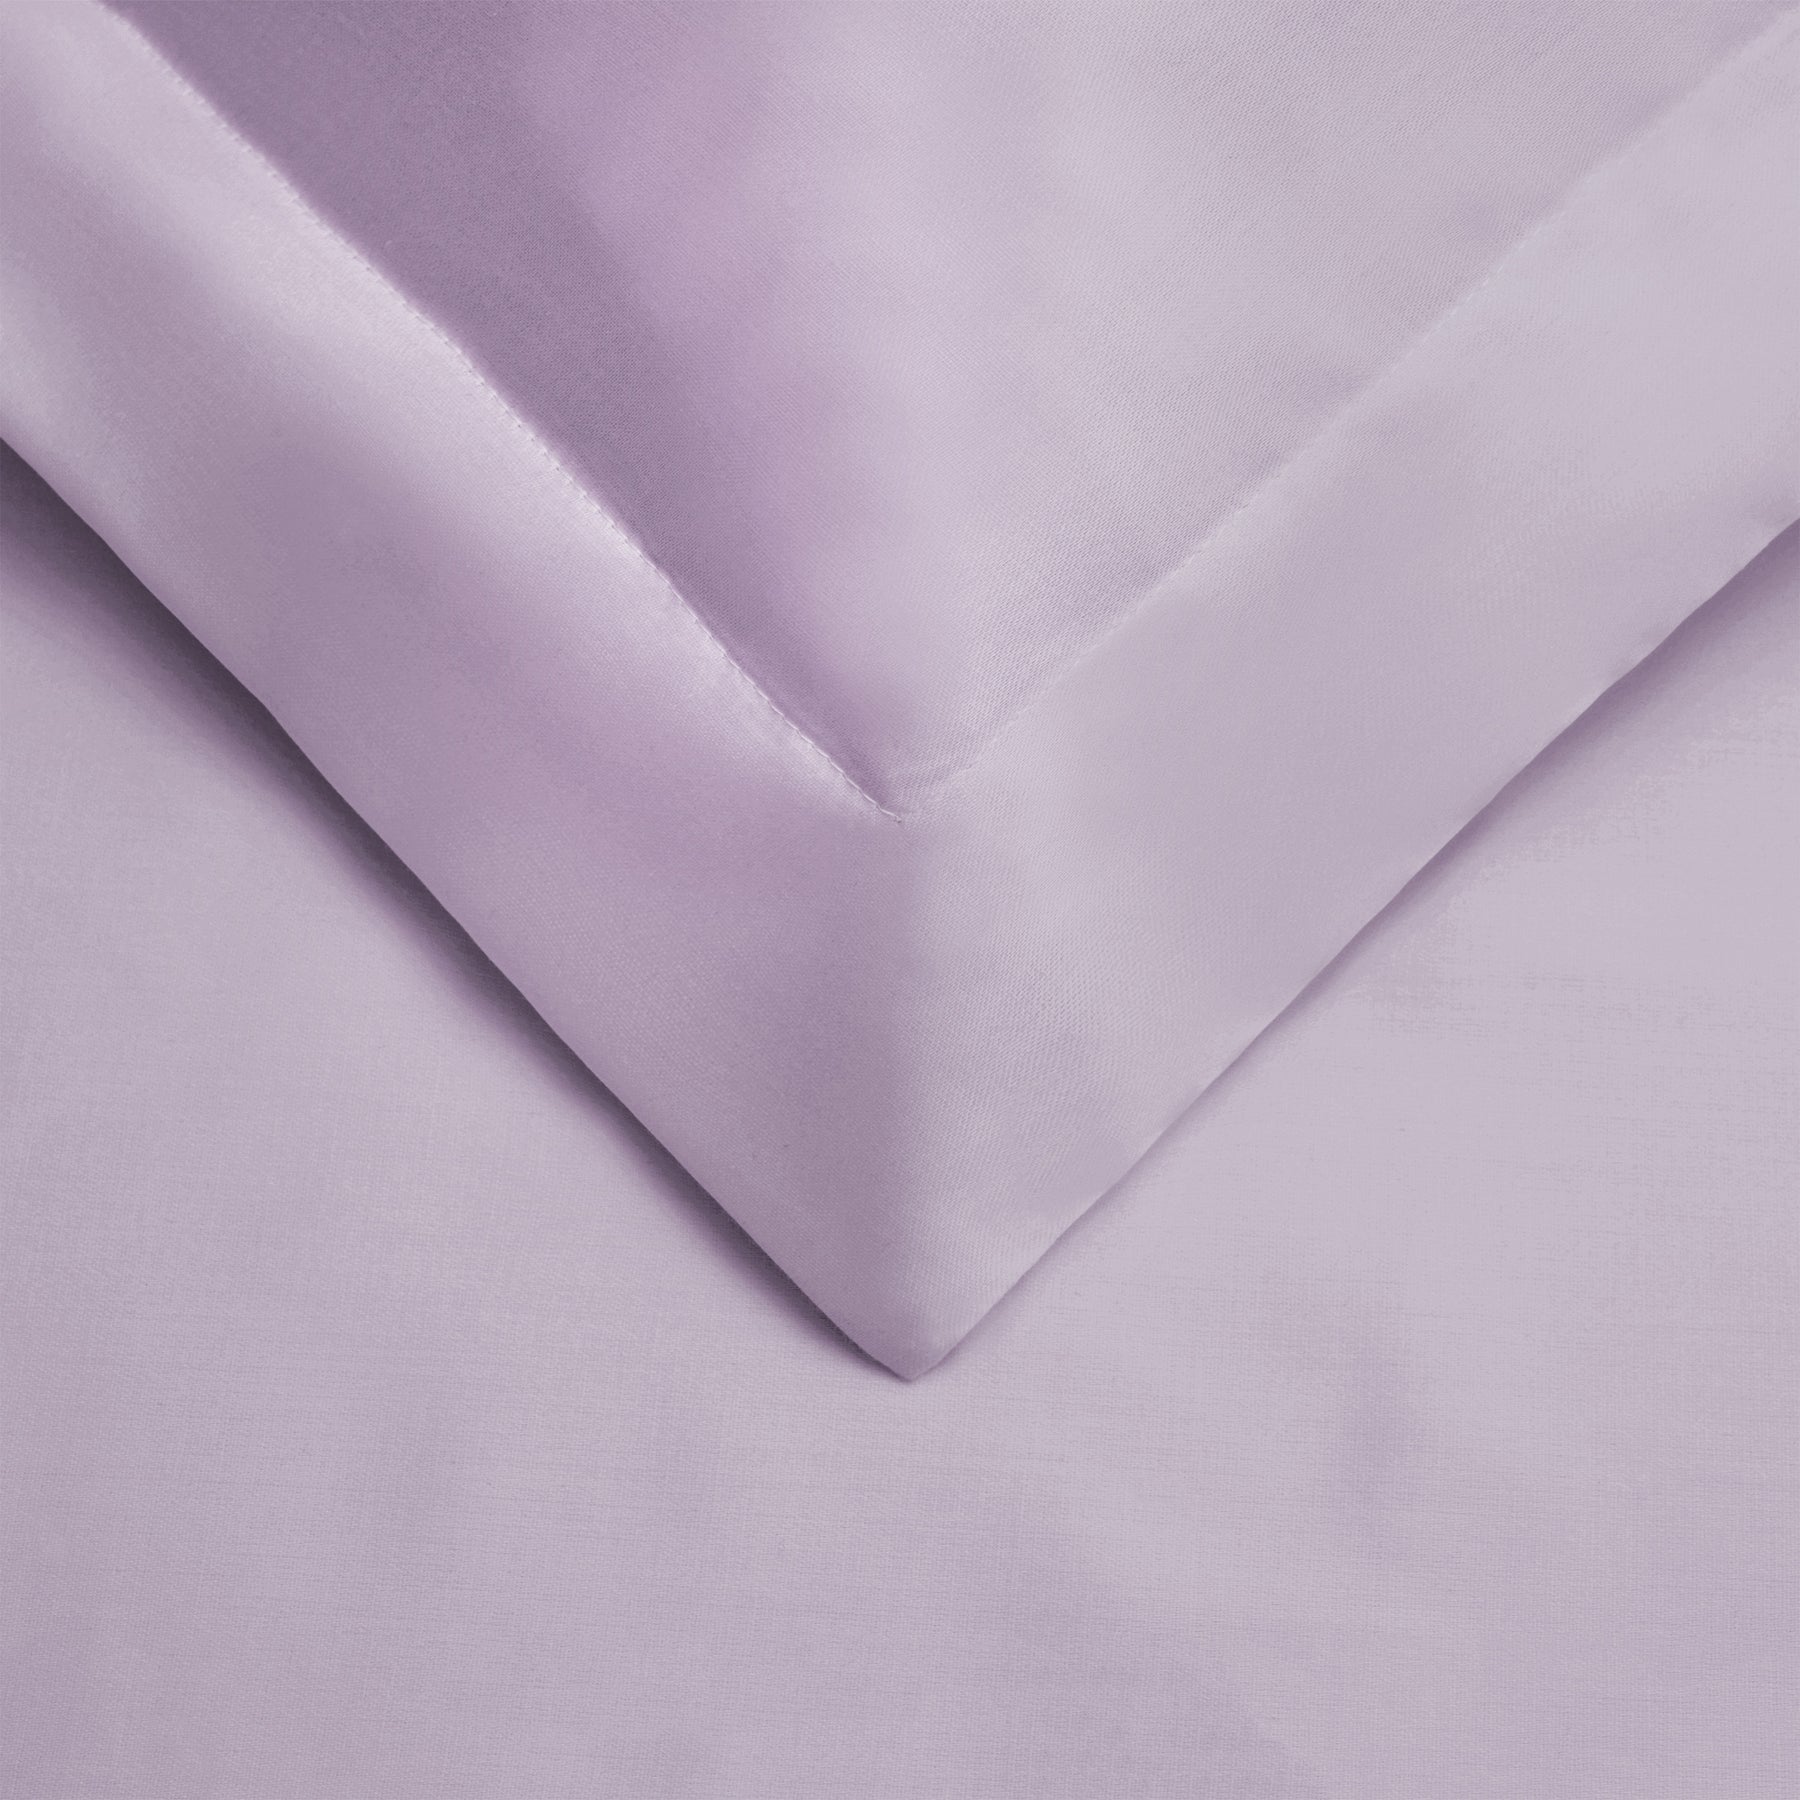 Superior Egyptian Cotton 300 Thread Count Solid Duvet Cover Set - Lavender